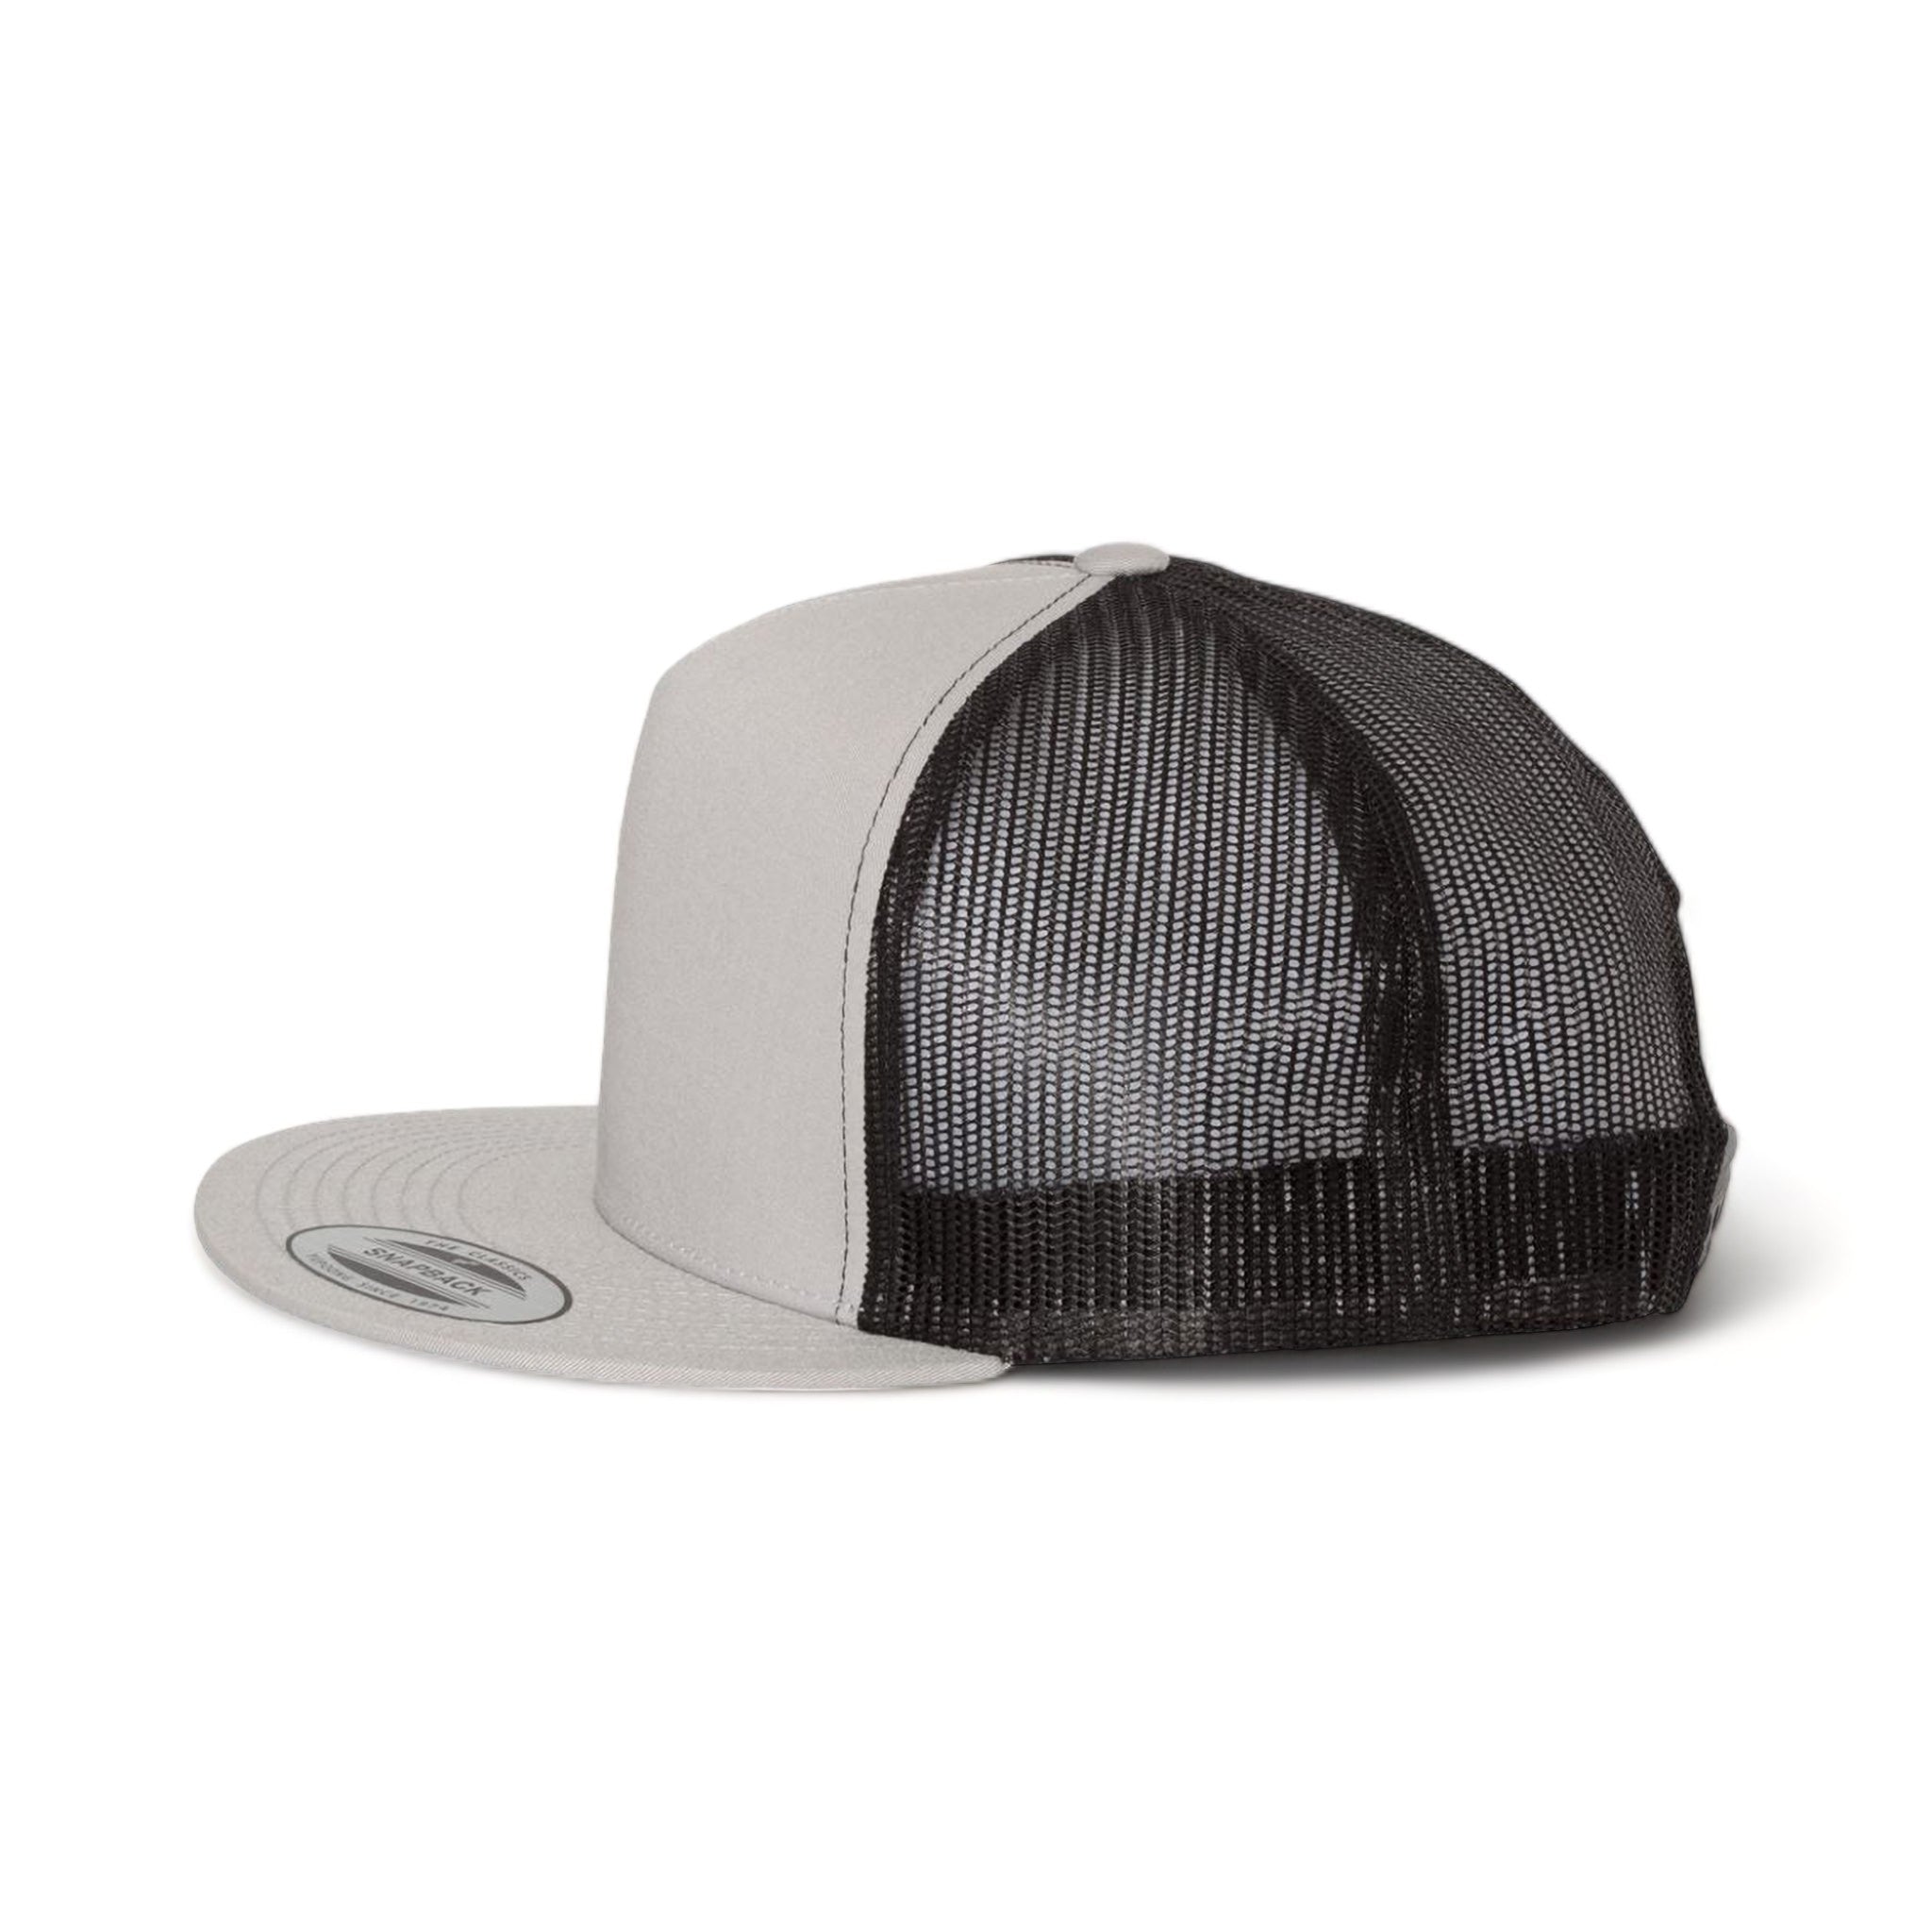 Side view of YP Classics 6006 custom hat in silver and black